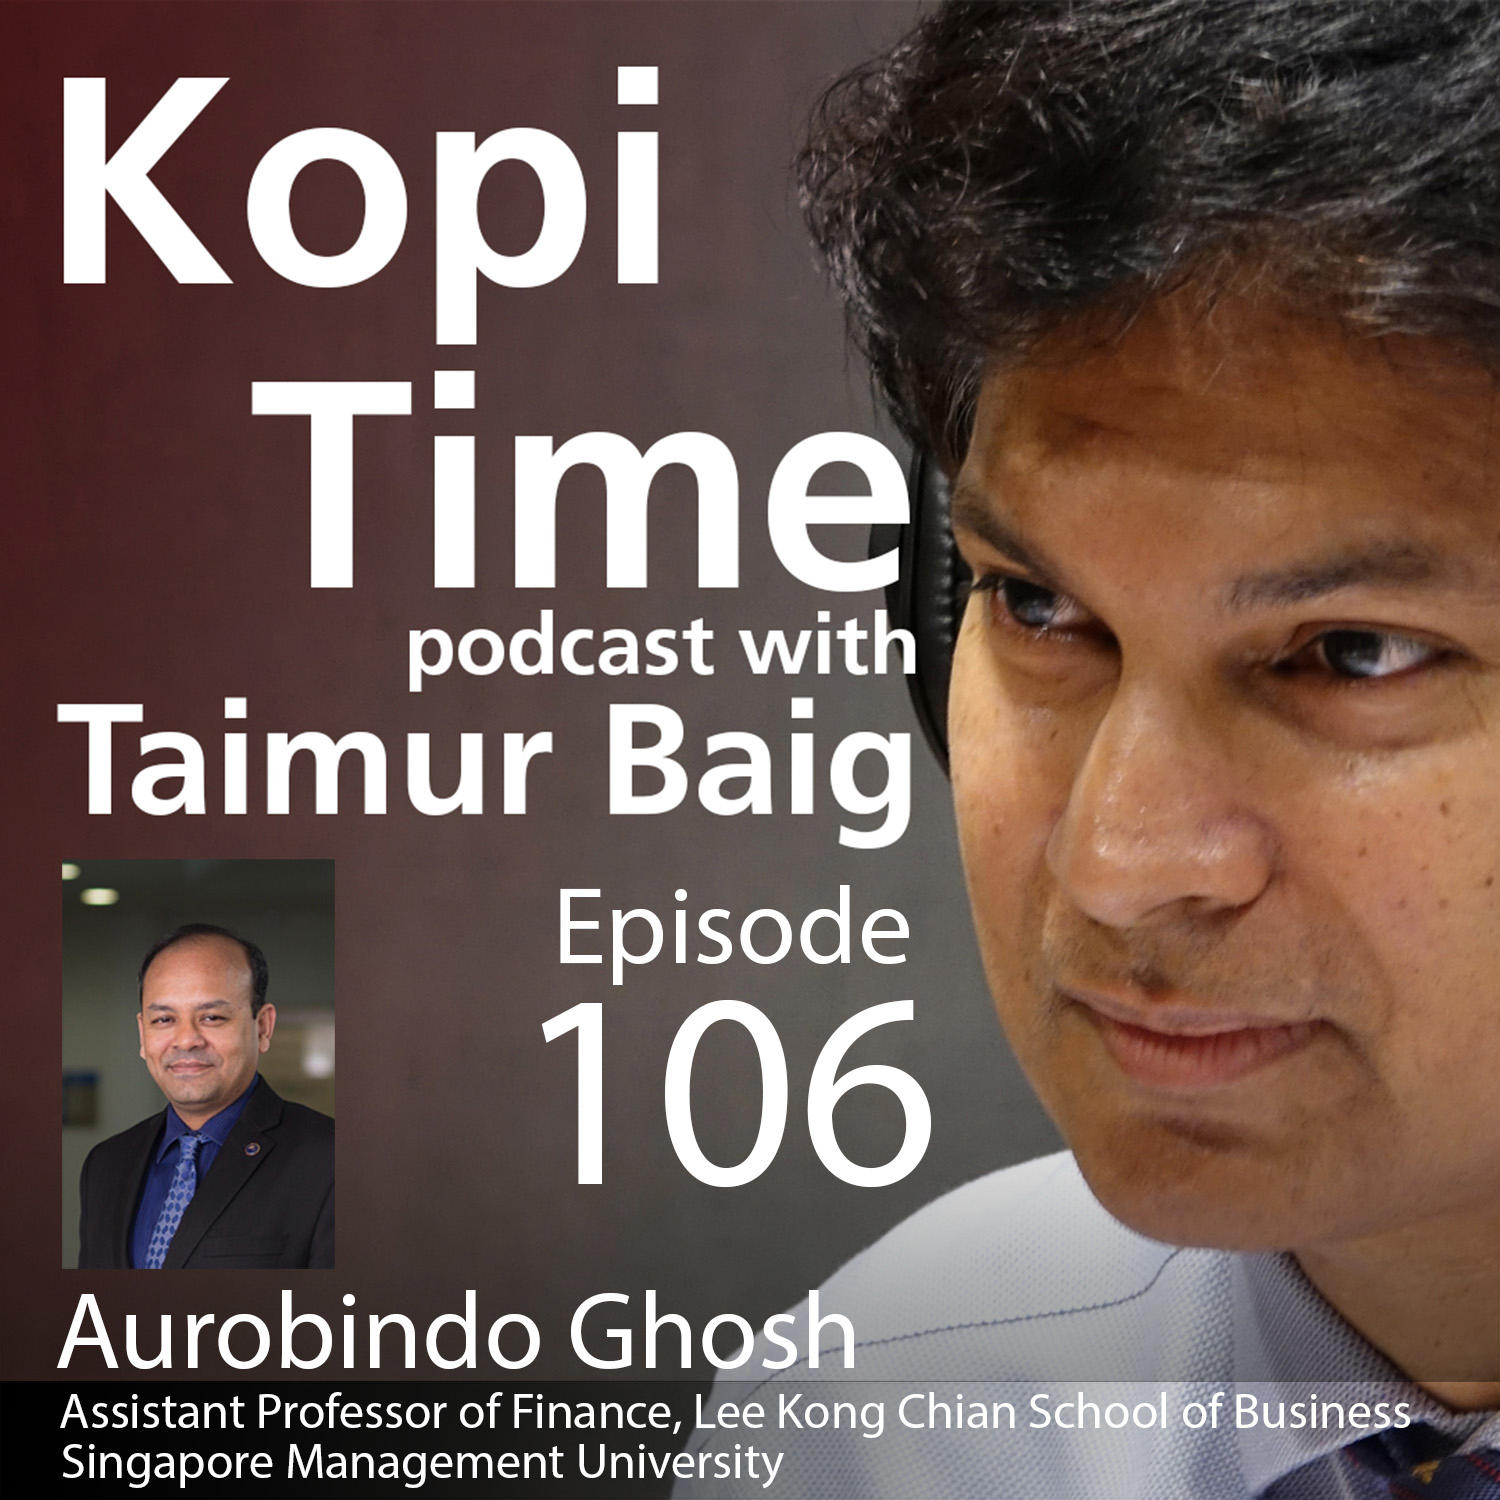 Kopi Time E106 - Prof Aurobindo Ghosh on inflation expectations and cost of living in Singapore